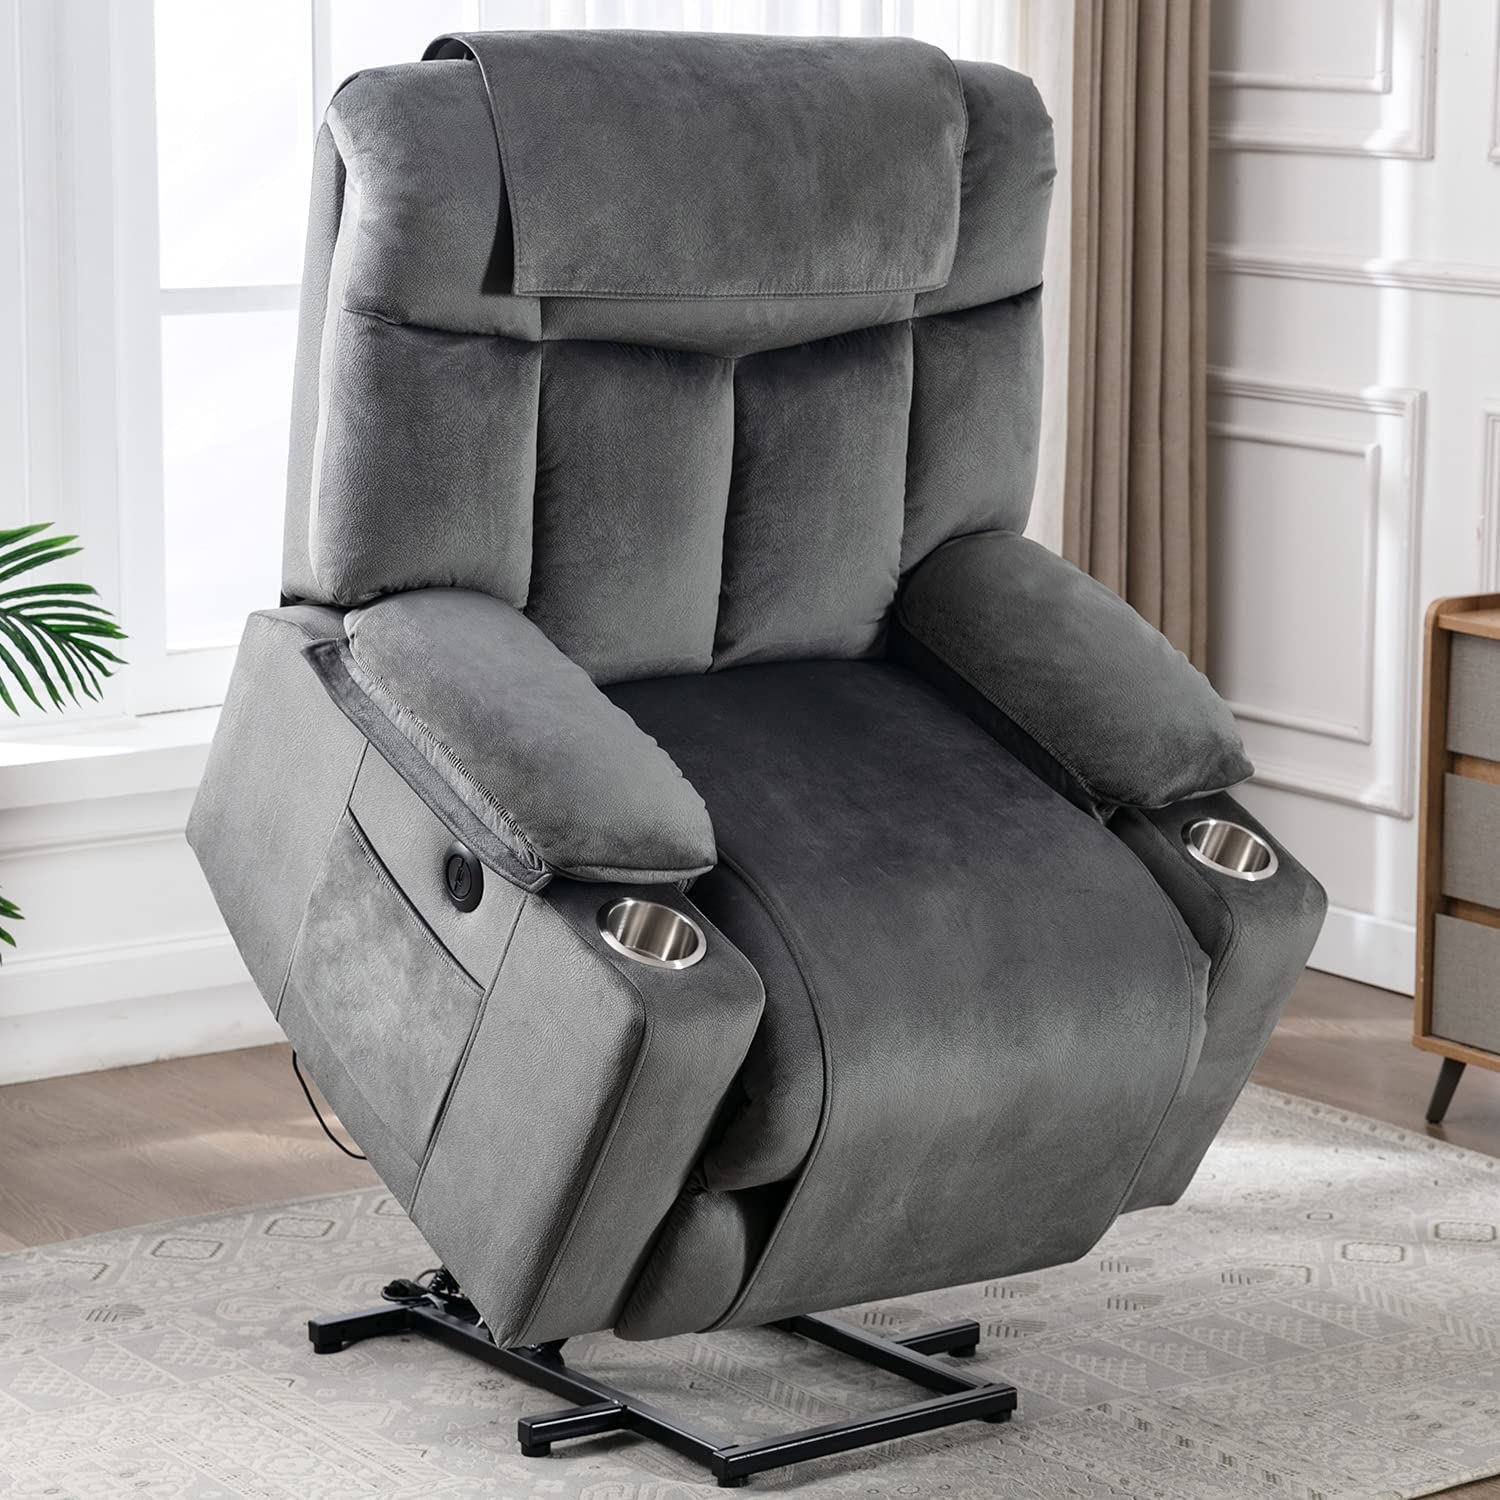 CANMOV Power Lift Recliner Chair for Elderly